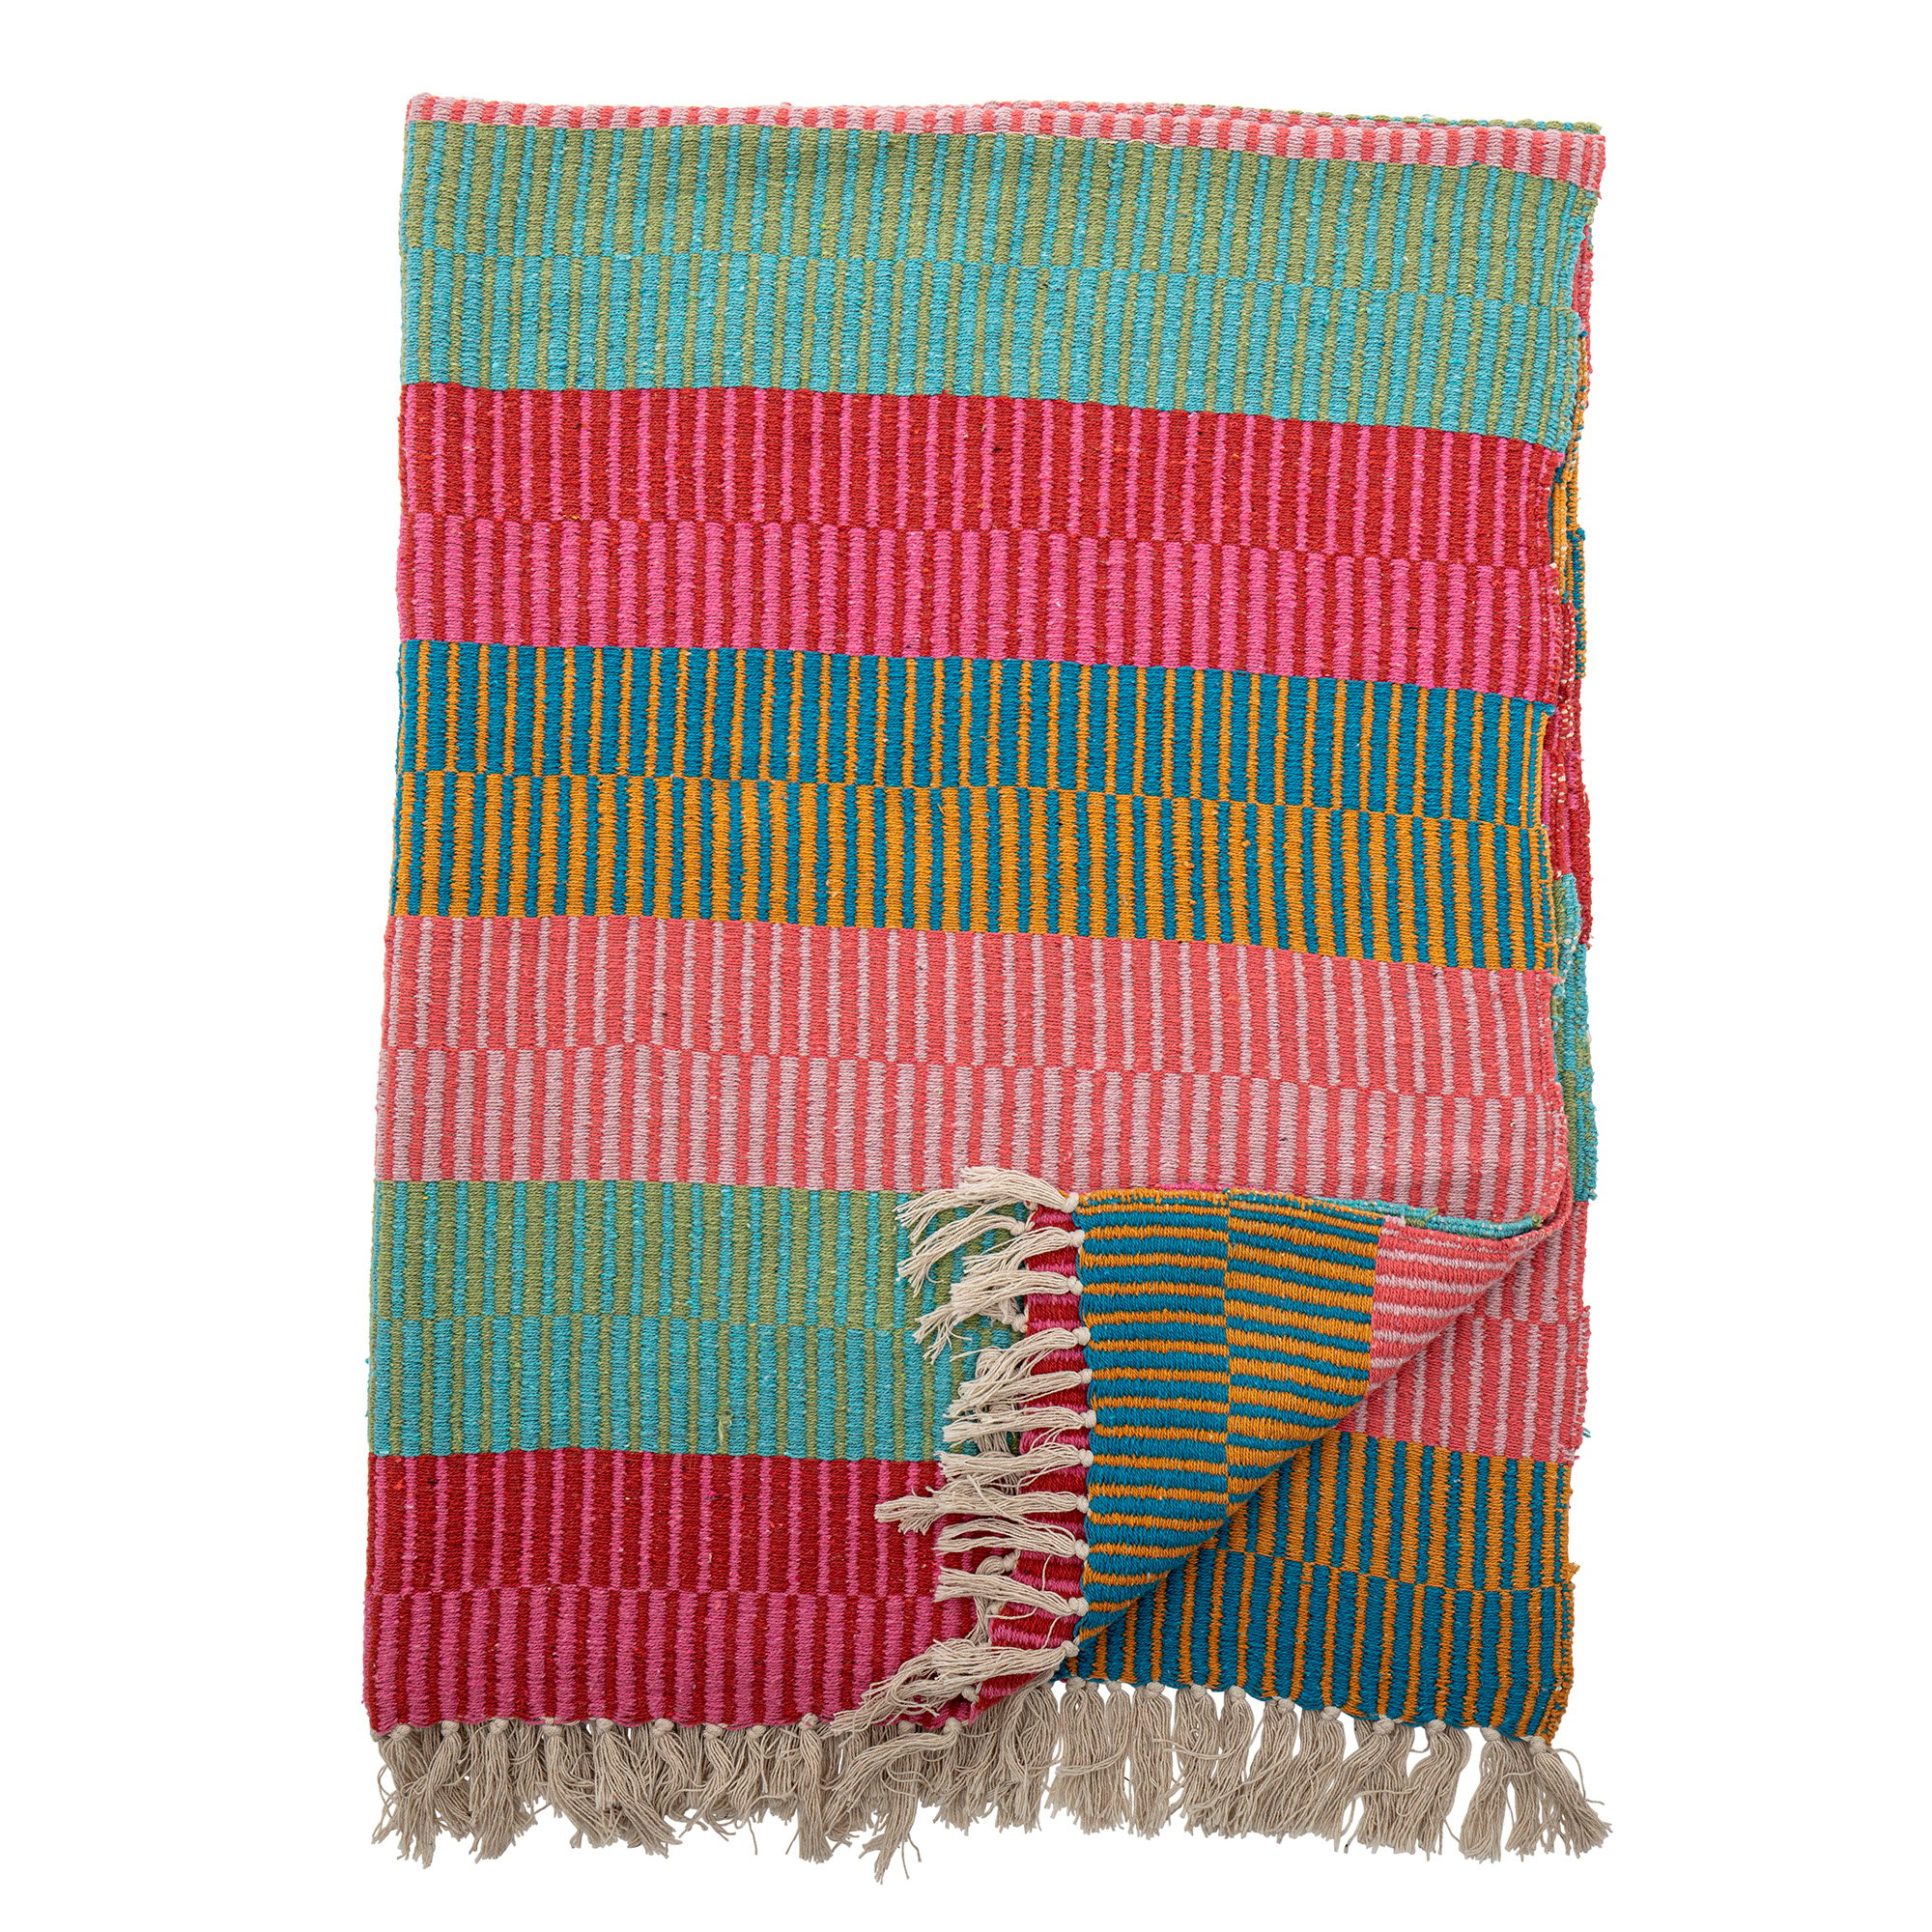 Creative Collection - Isnel Throw Plaid - Recycled Cotton (82051011)